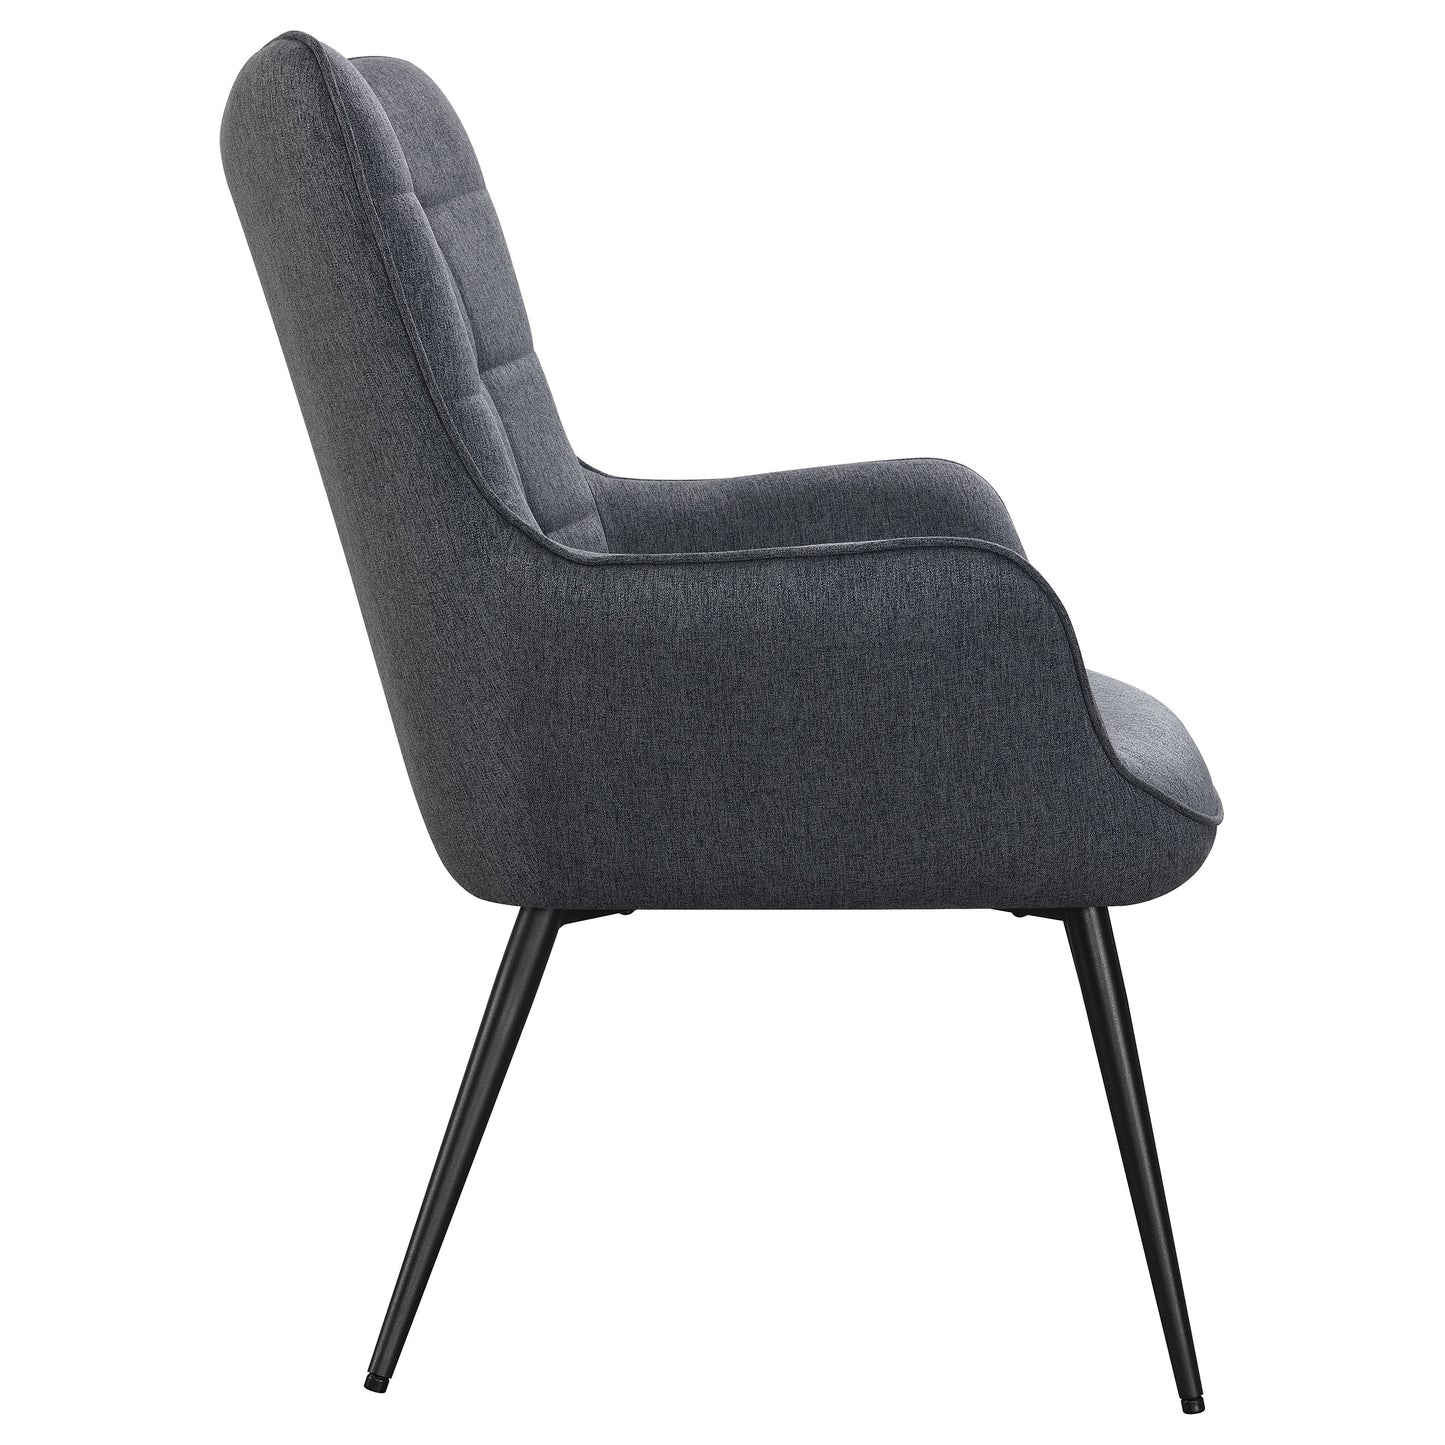 Isla Upholstered Flared Arms Accent Chair with Grid Tufted